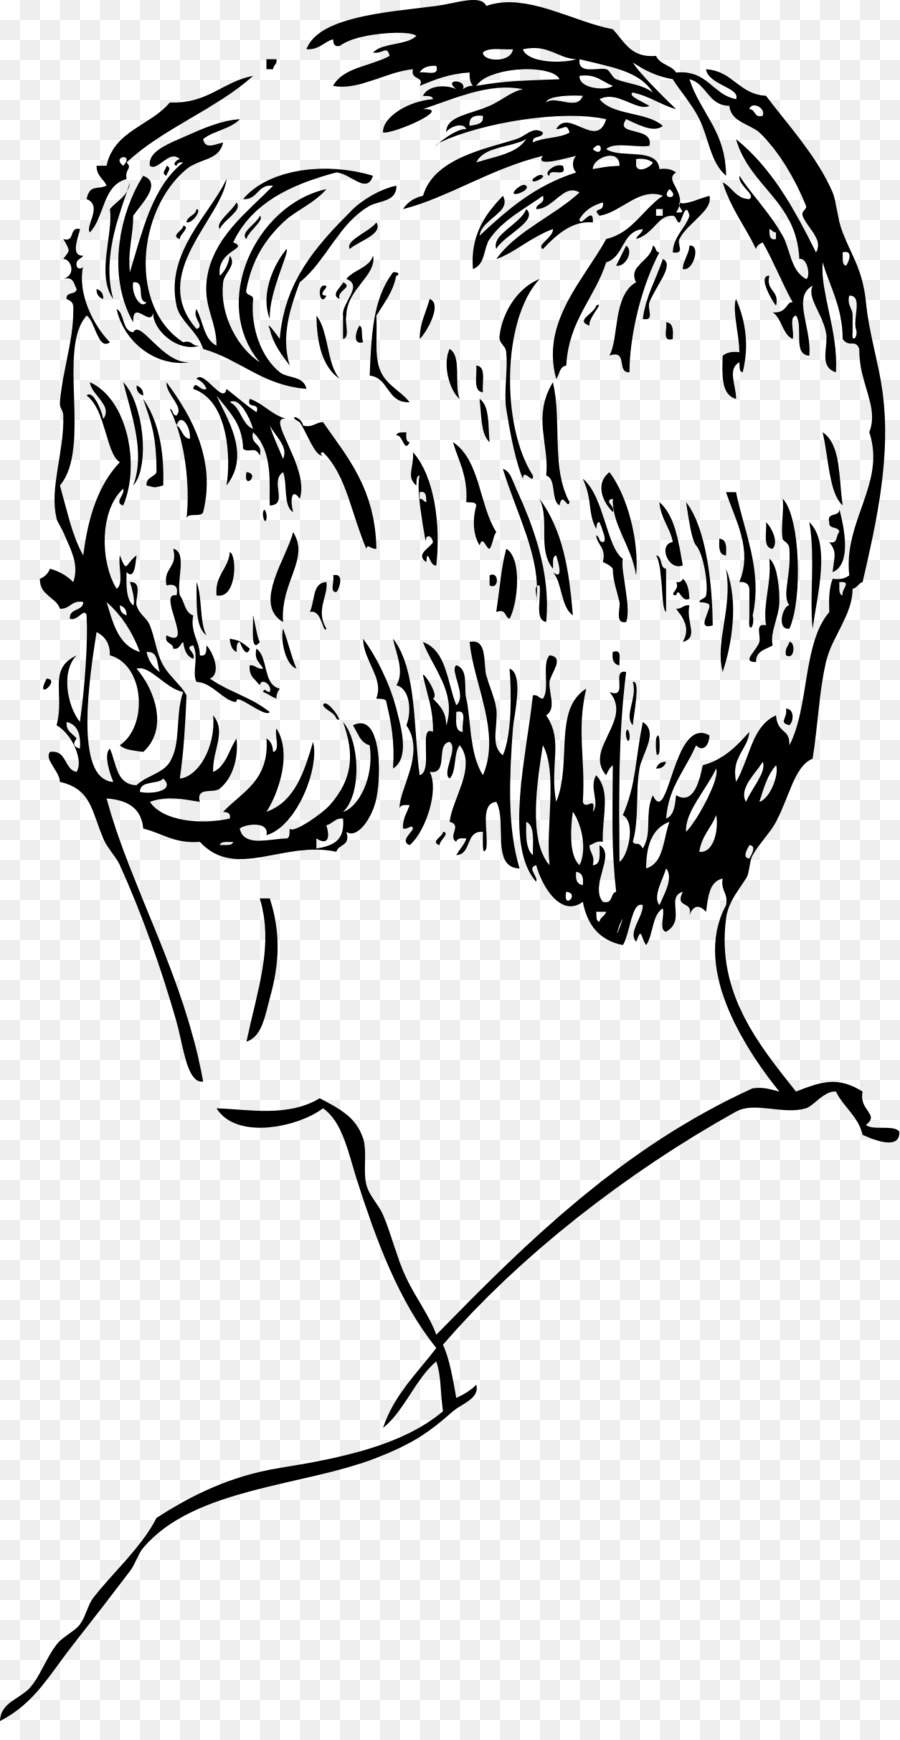 Clip art Scalable Vector Graphics Hairstyle Free content - hairstyles drawing png boy hairstyle png download - 1255*2400 - Free Transparent Hairstyle png Download.